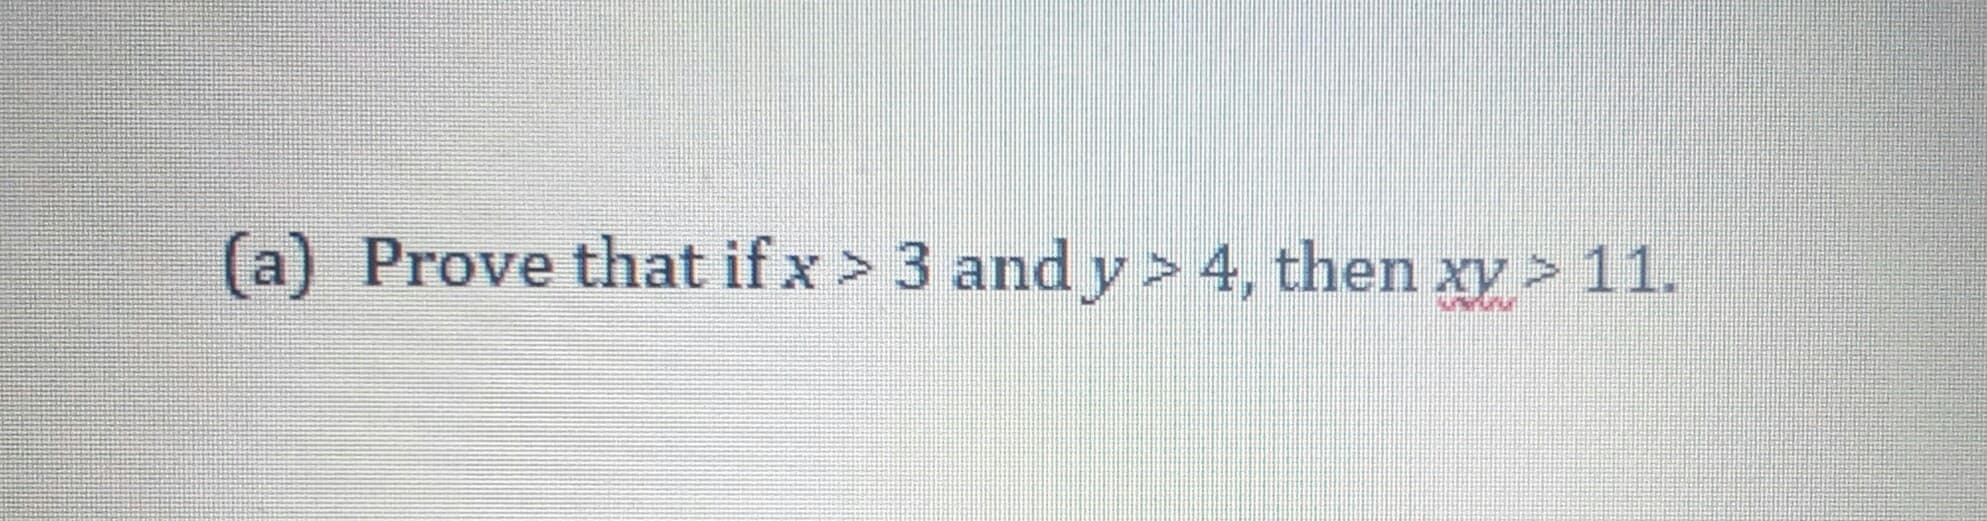 Prove that ifx > 3 and y> 4, then xy > 11.
